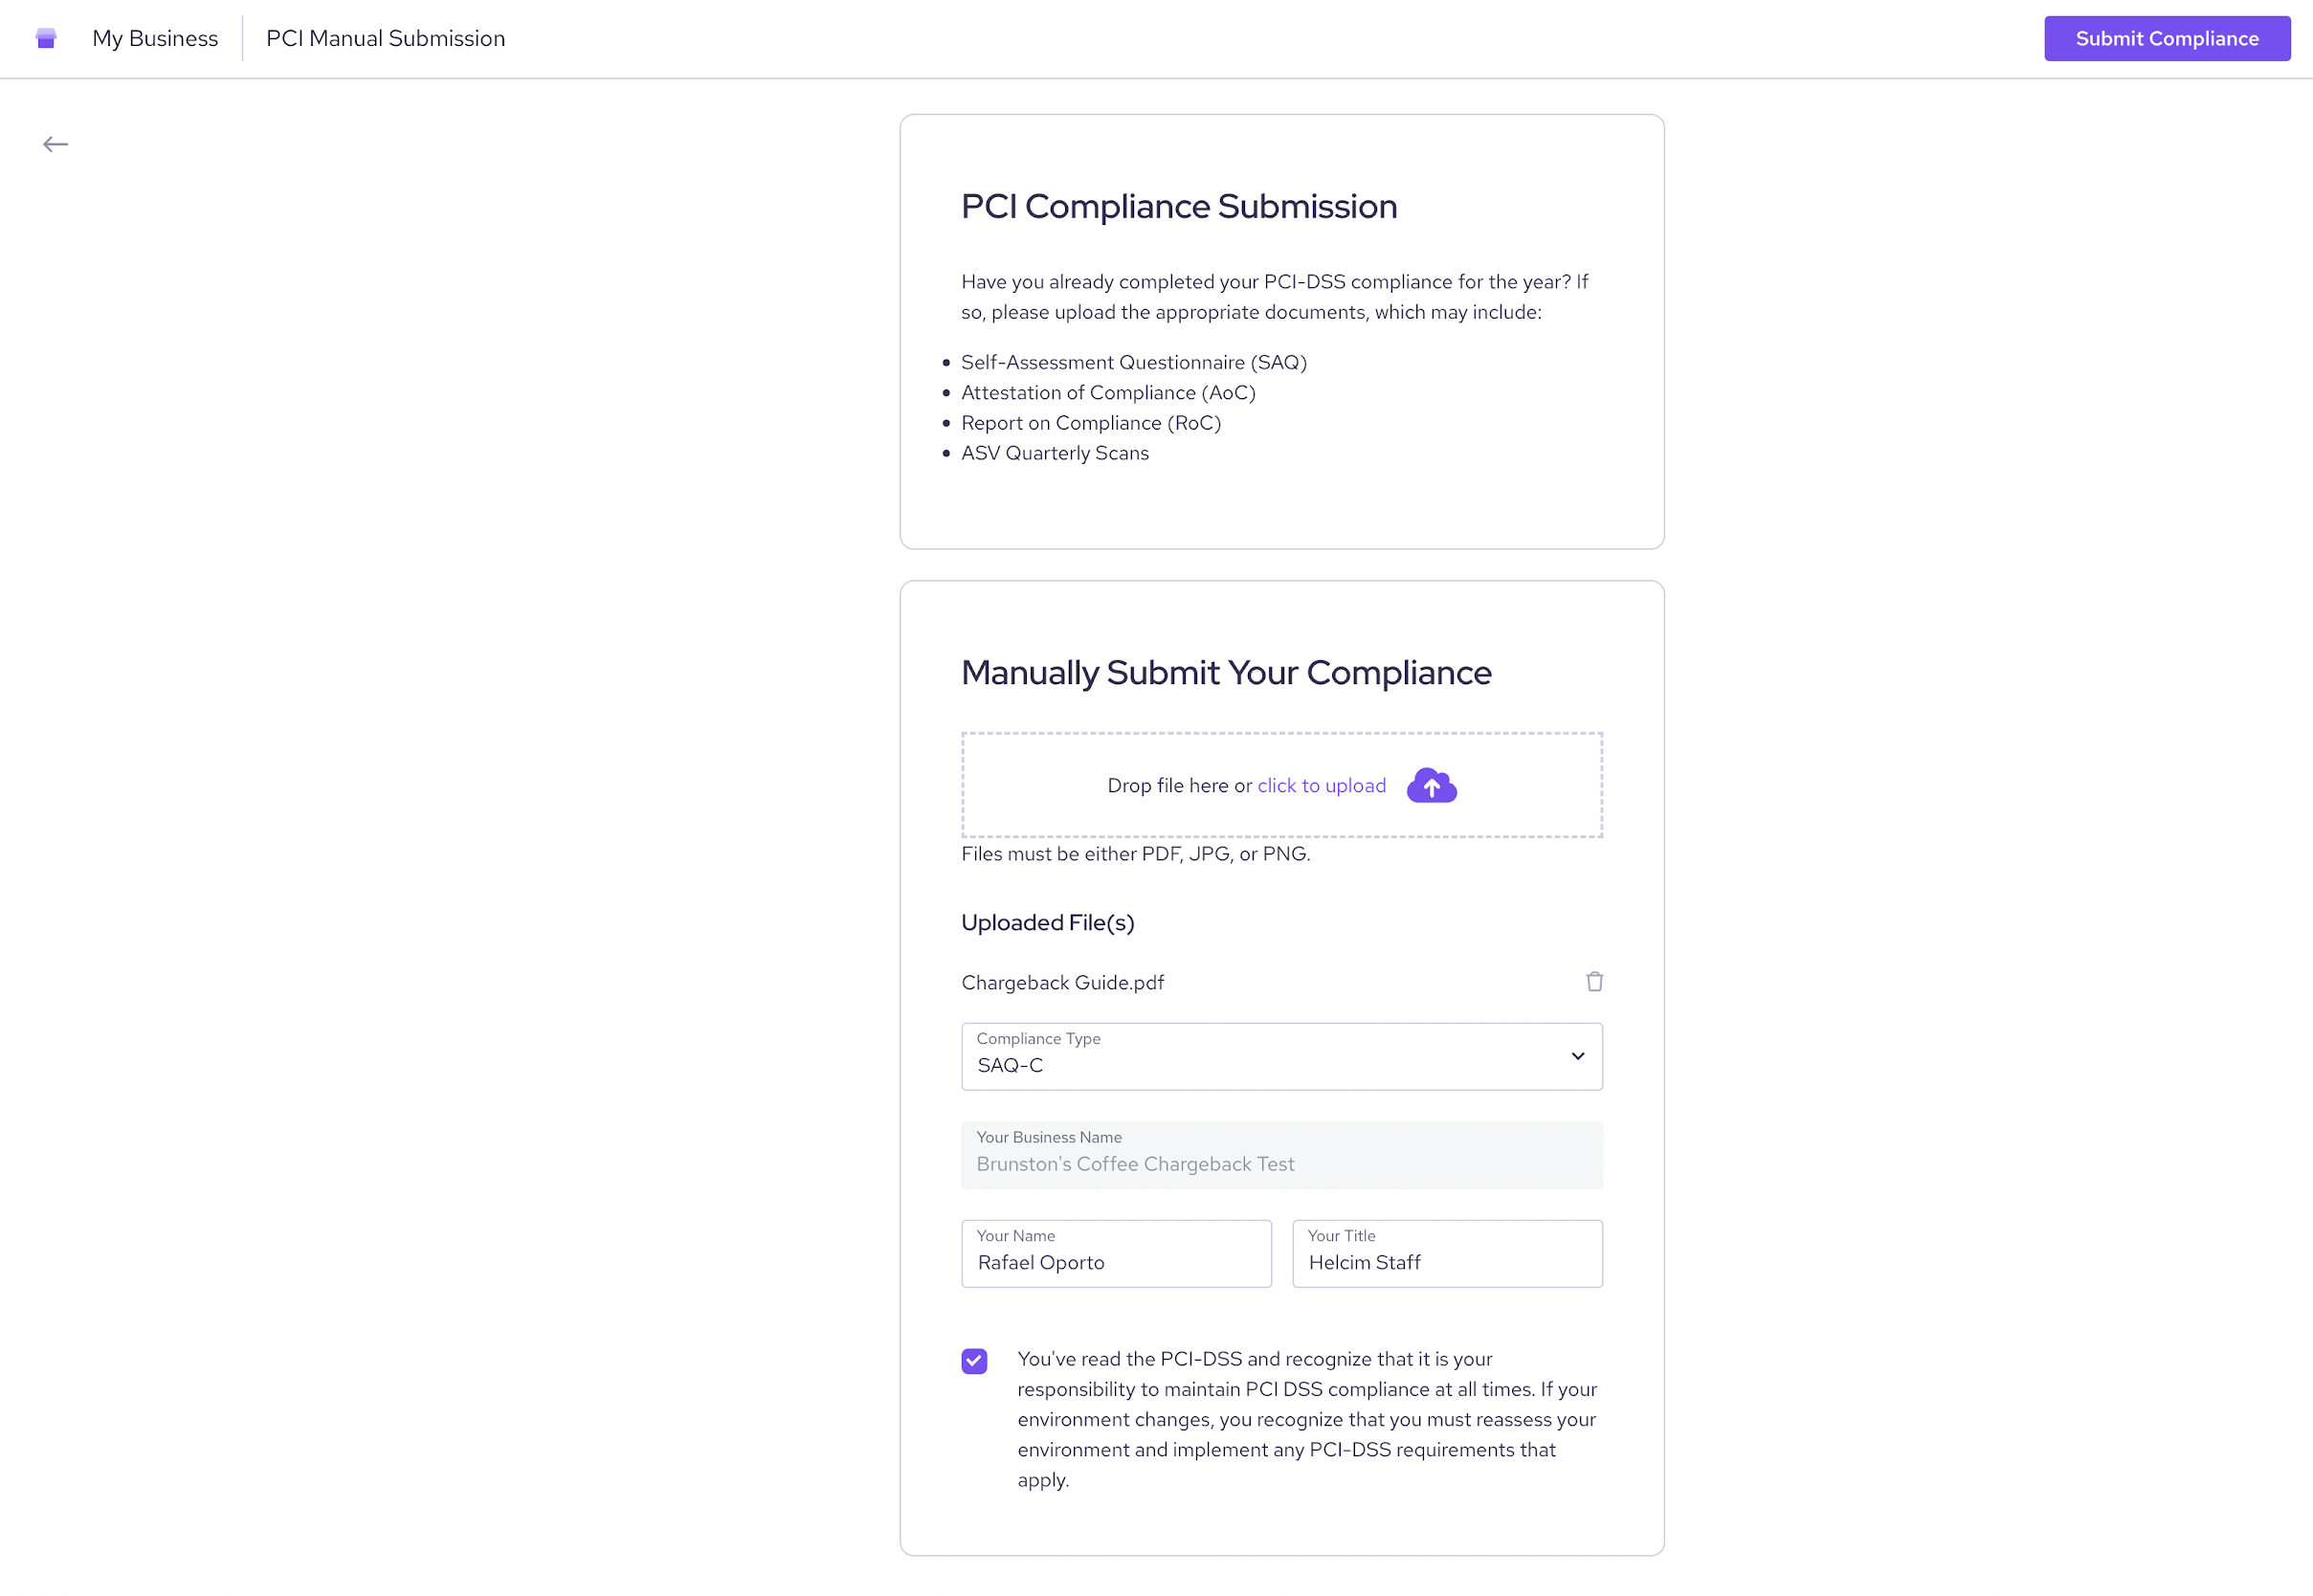 PCI compliance manual submission screen